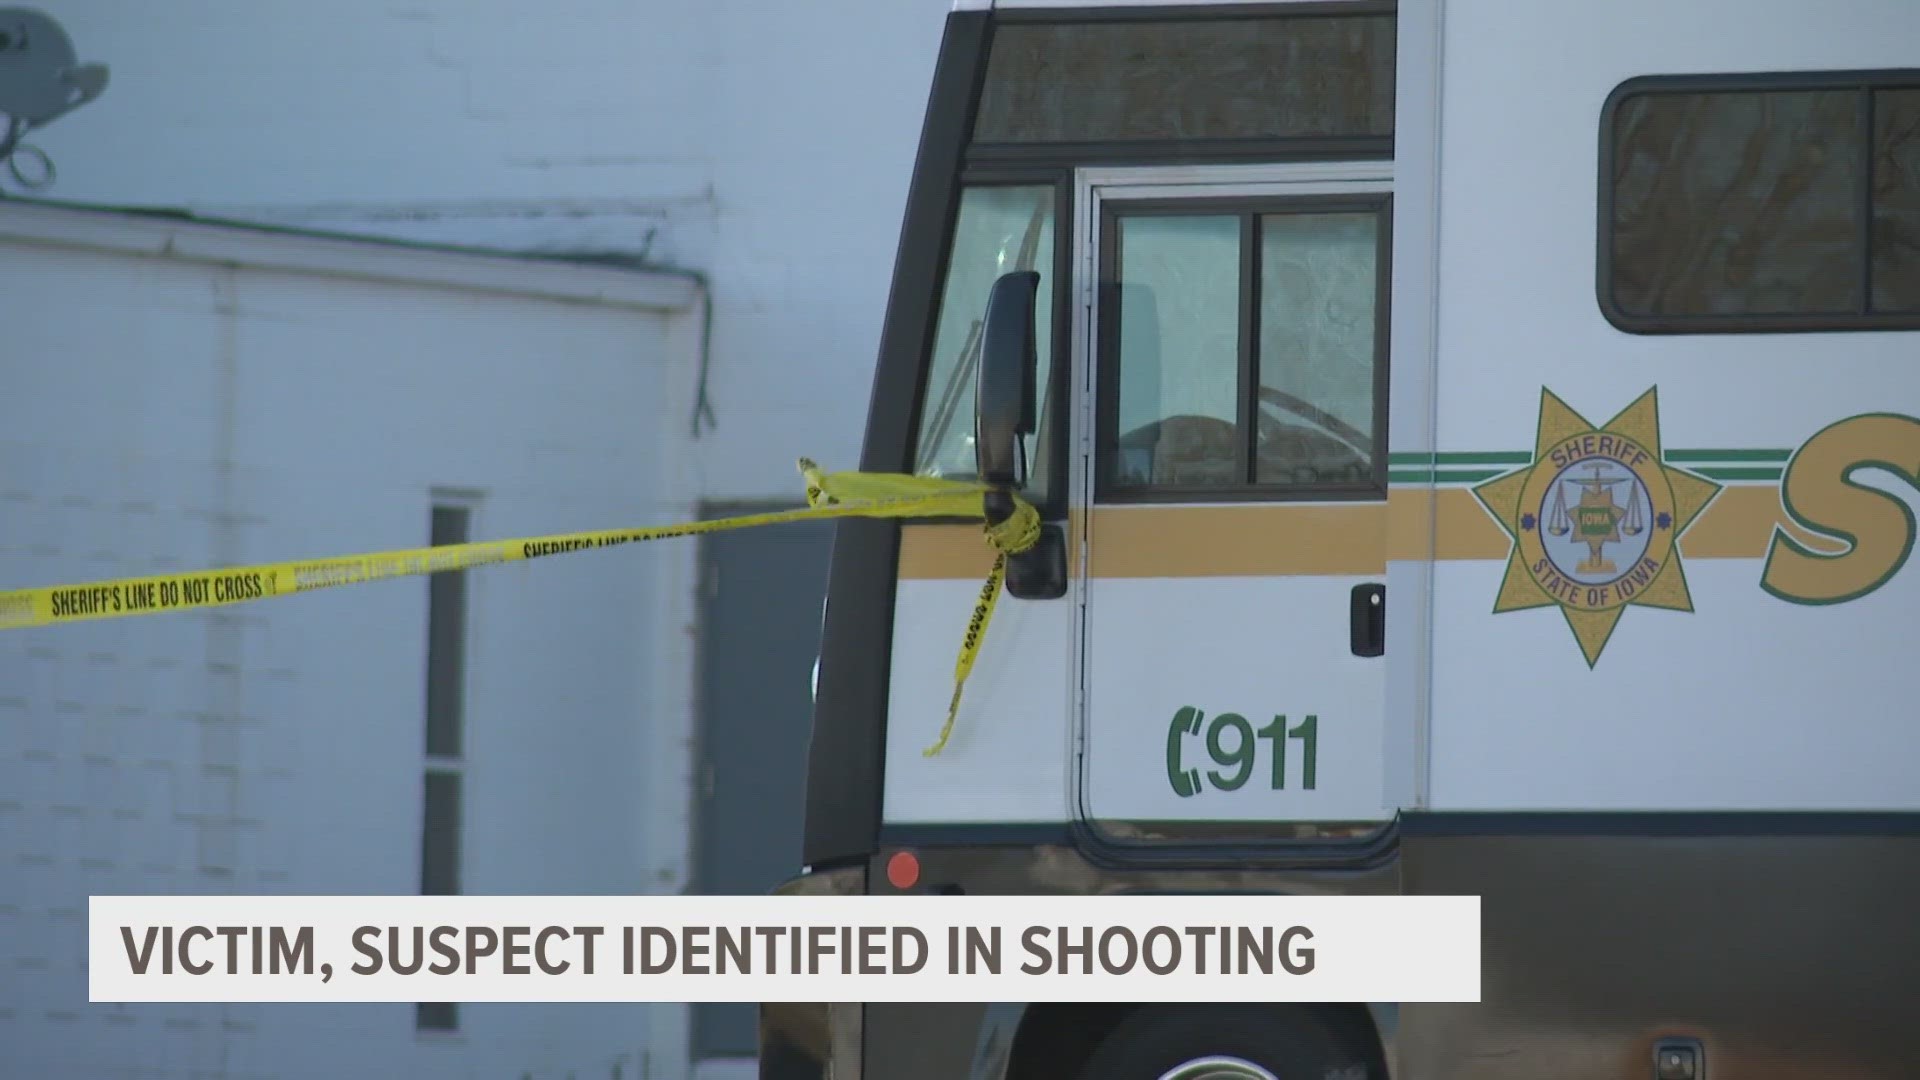 Authorities said the two men were "known to each other" prior to the shooting.